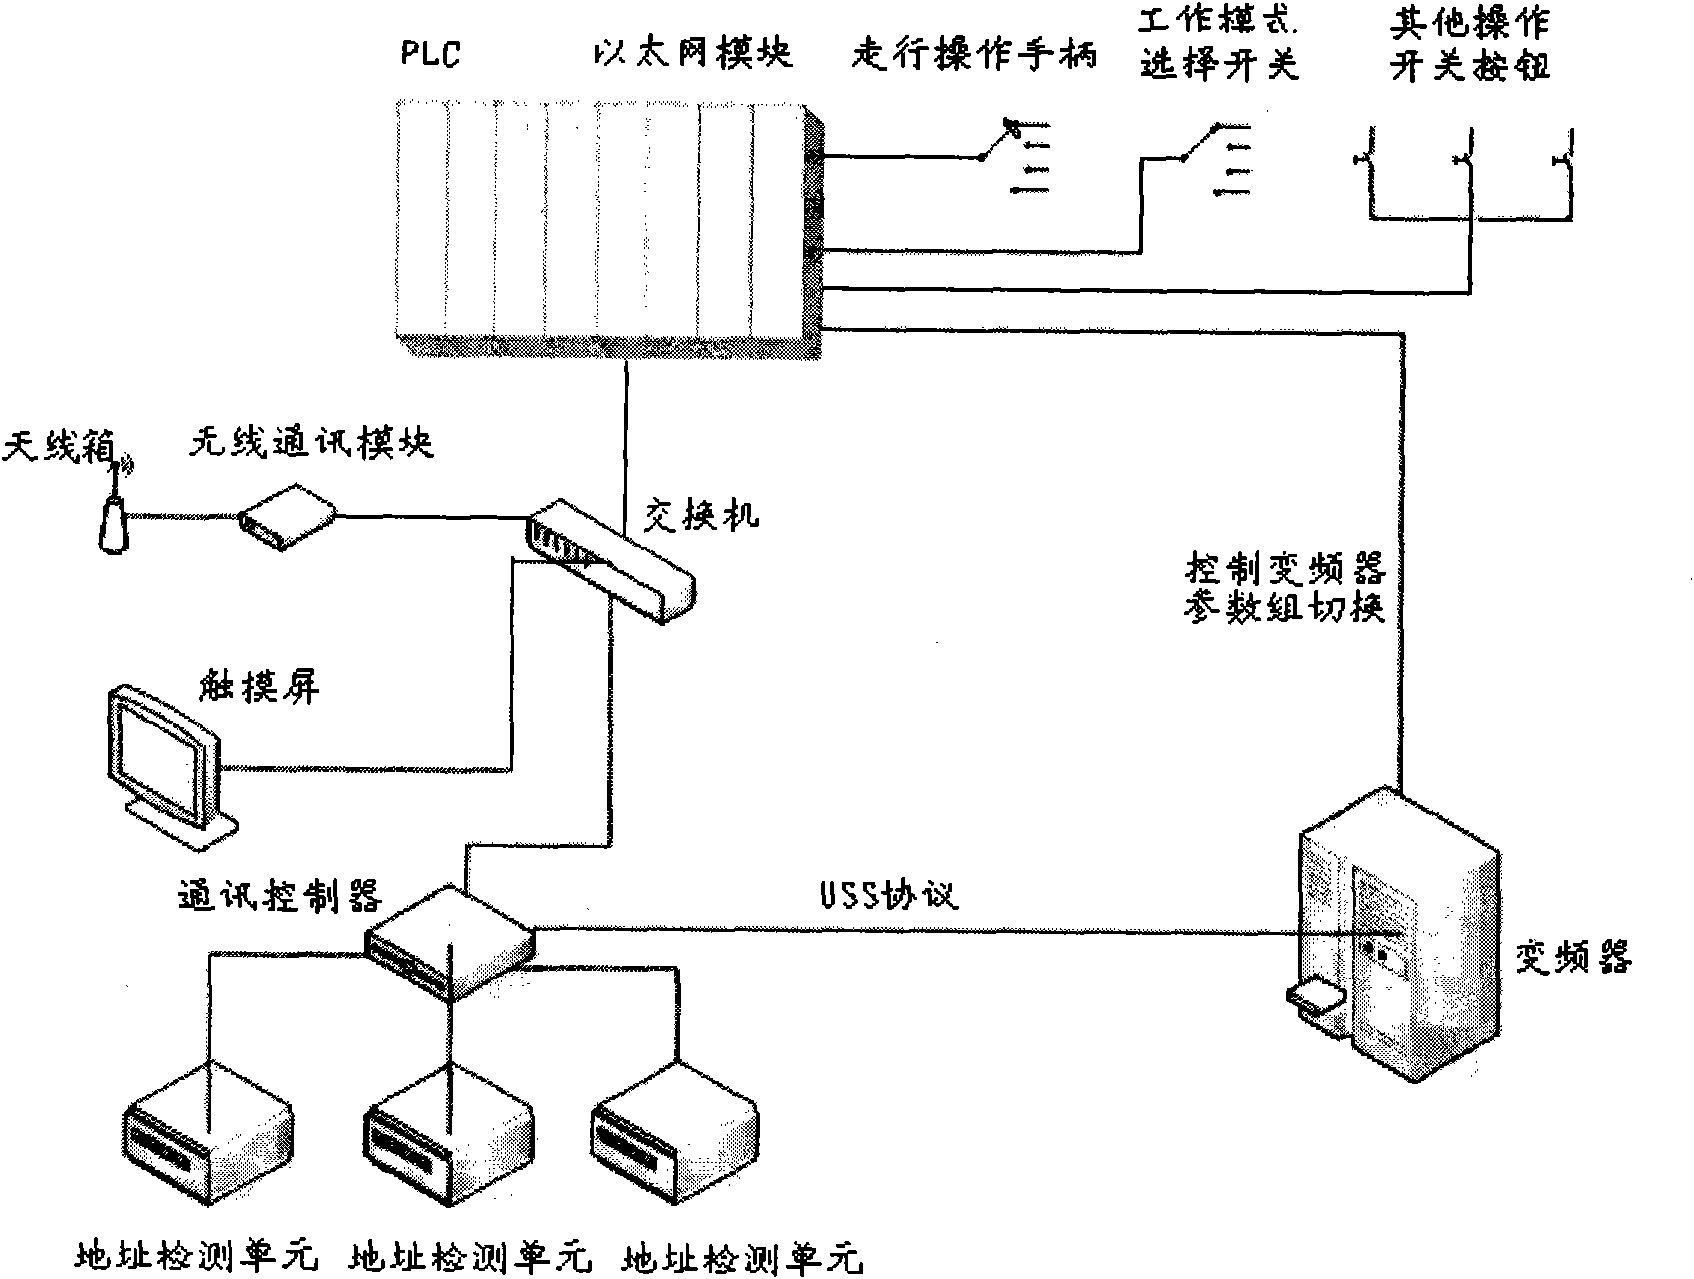 System for detecting address of coke oven and recognizing heat number automatically